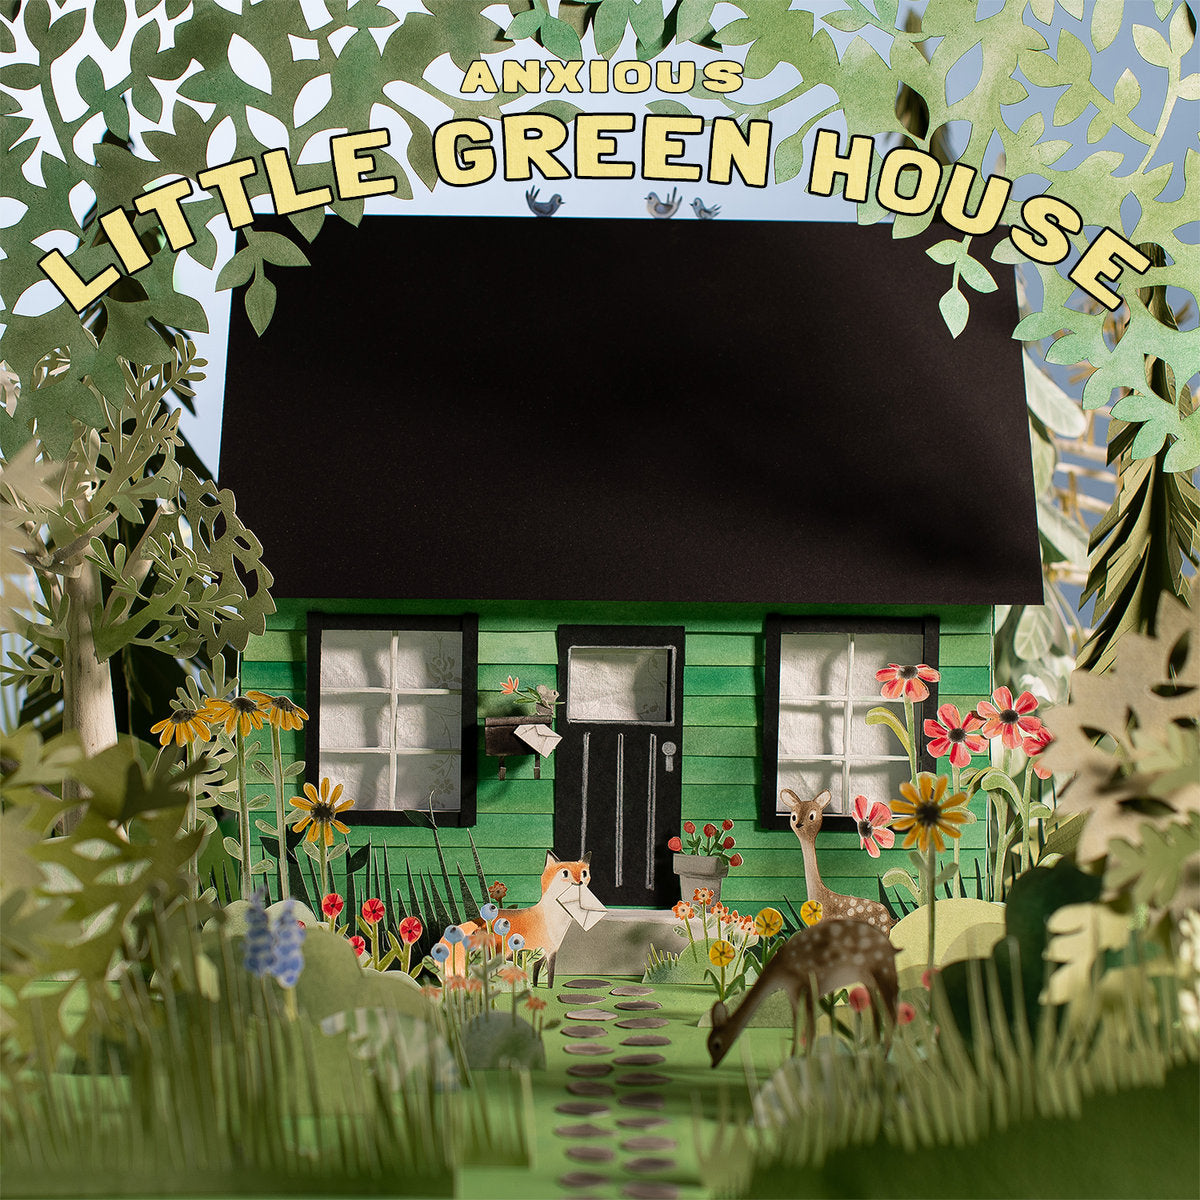 Anxious "Little Green House" CD (Japanese Import)